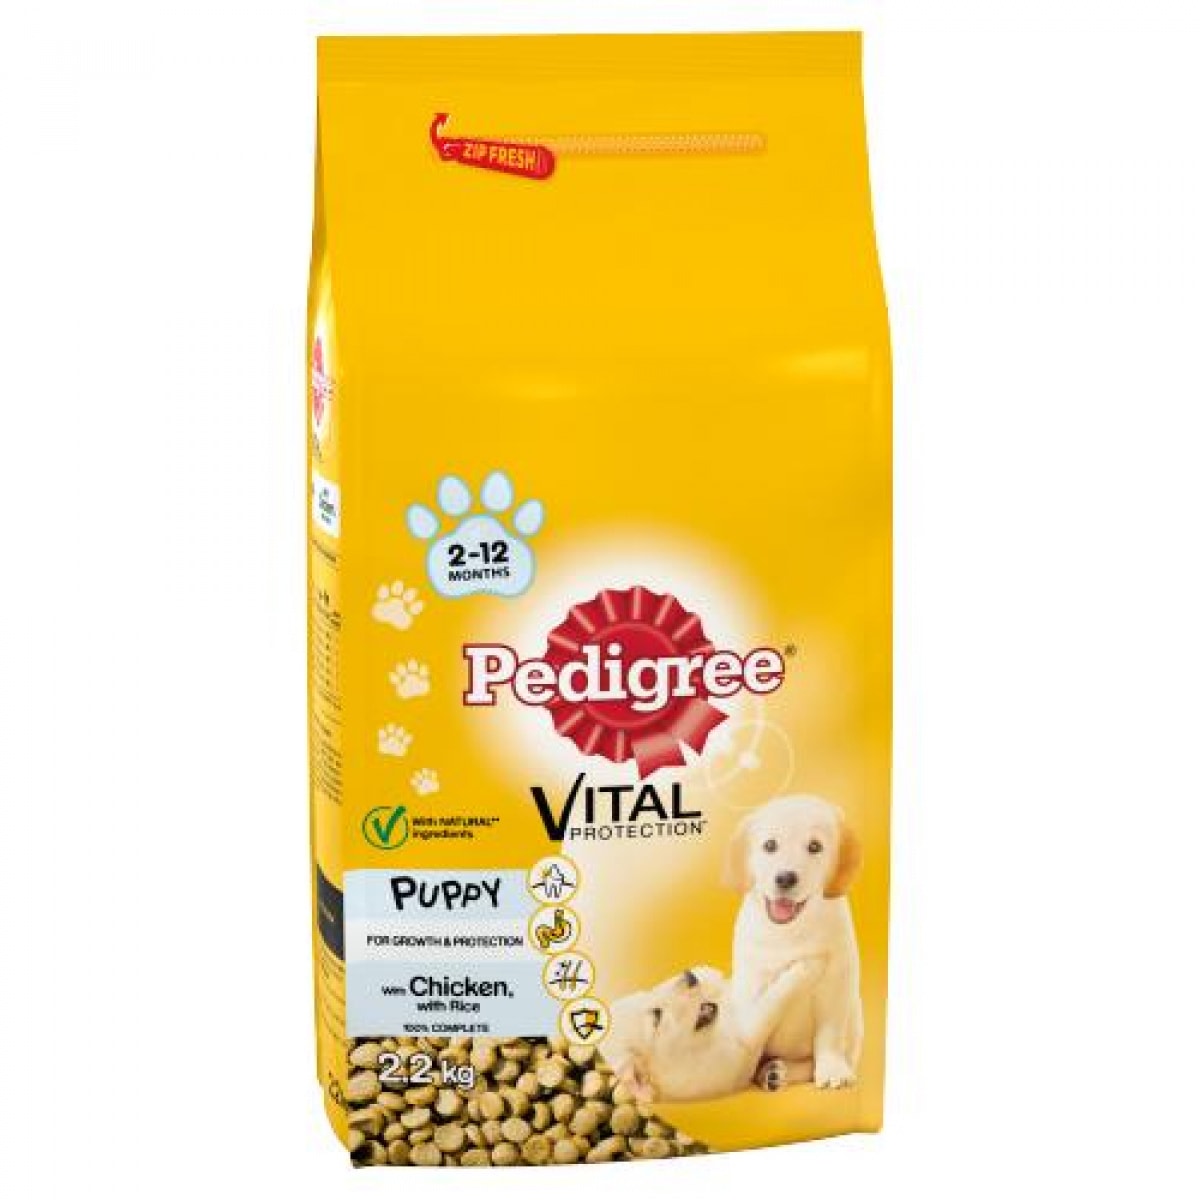 Pedigree Puppy 3kg – Pawfect Supplies Ltd Product Image